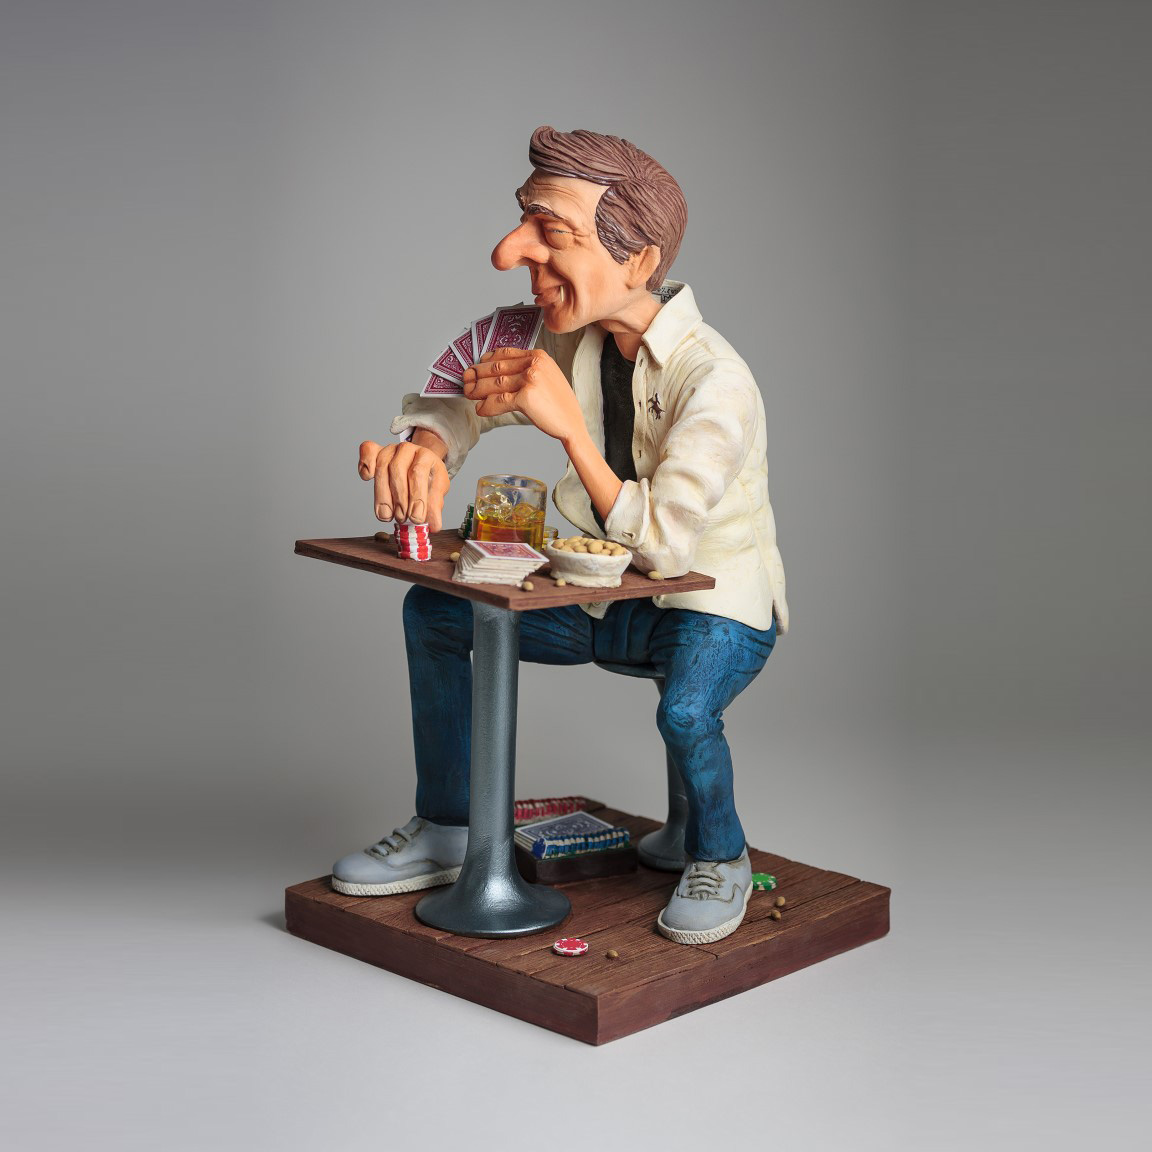 Guillermo Forchino Poker Player Figurines Gifts